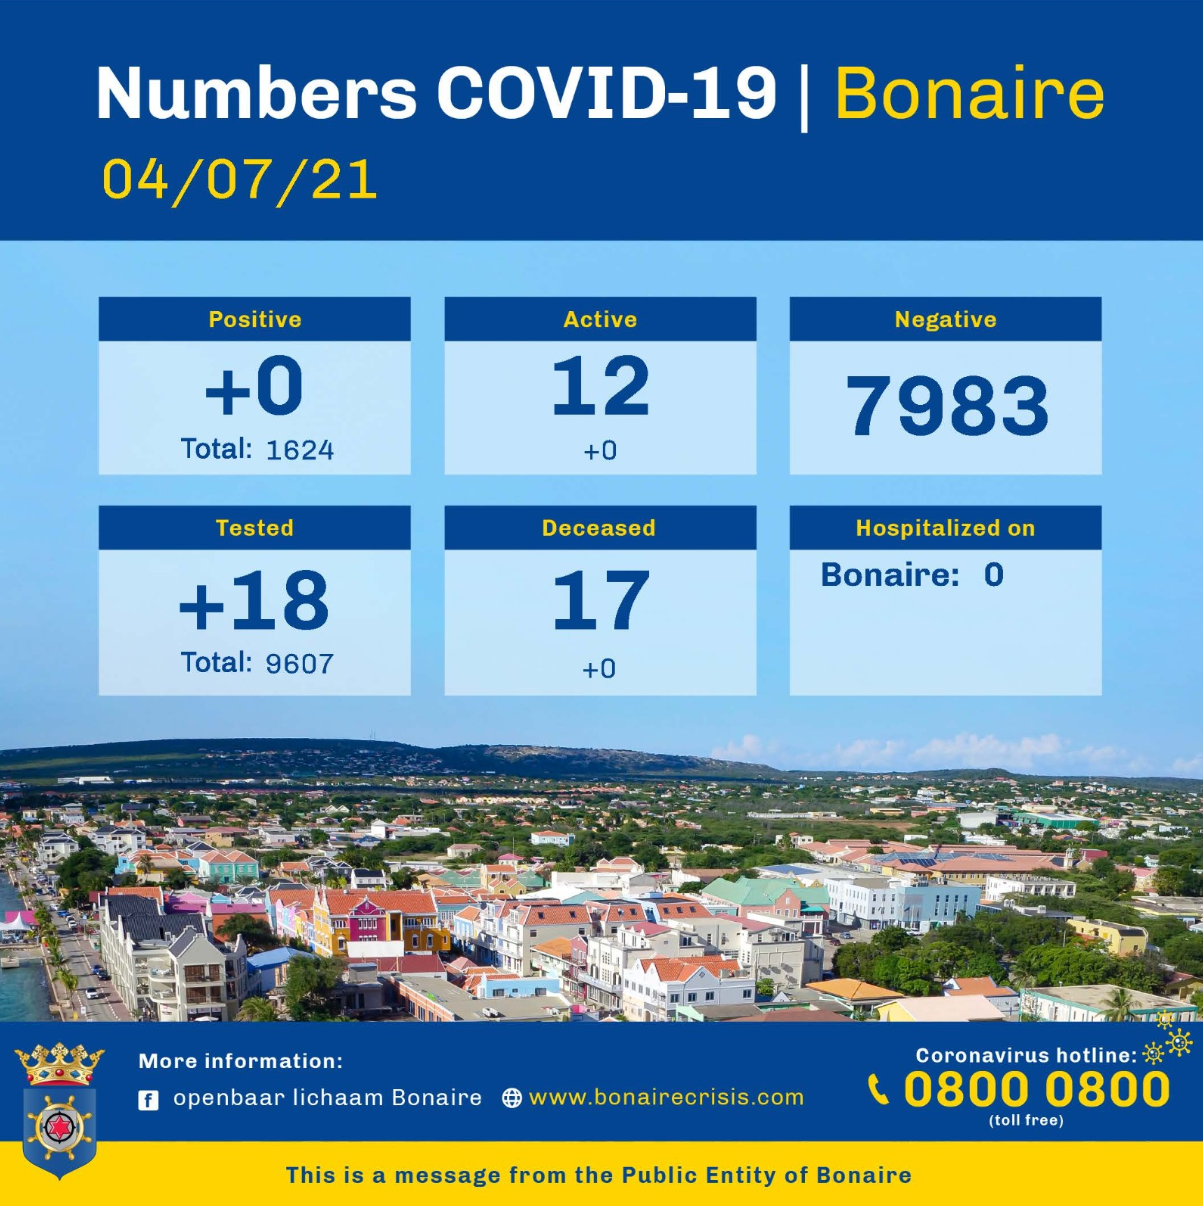 Third day without new Covid infections on Bonaire